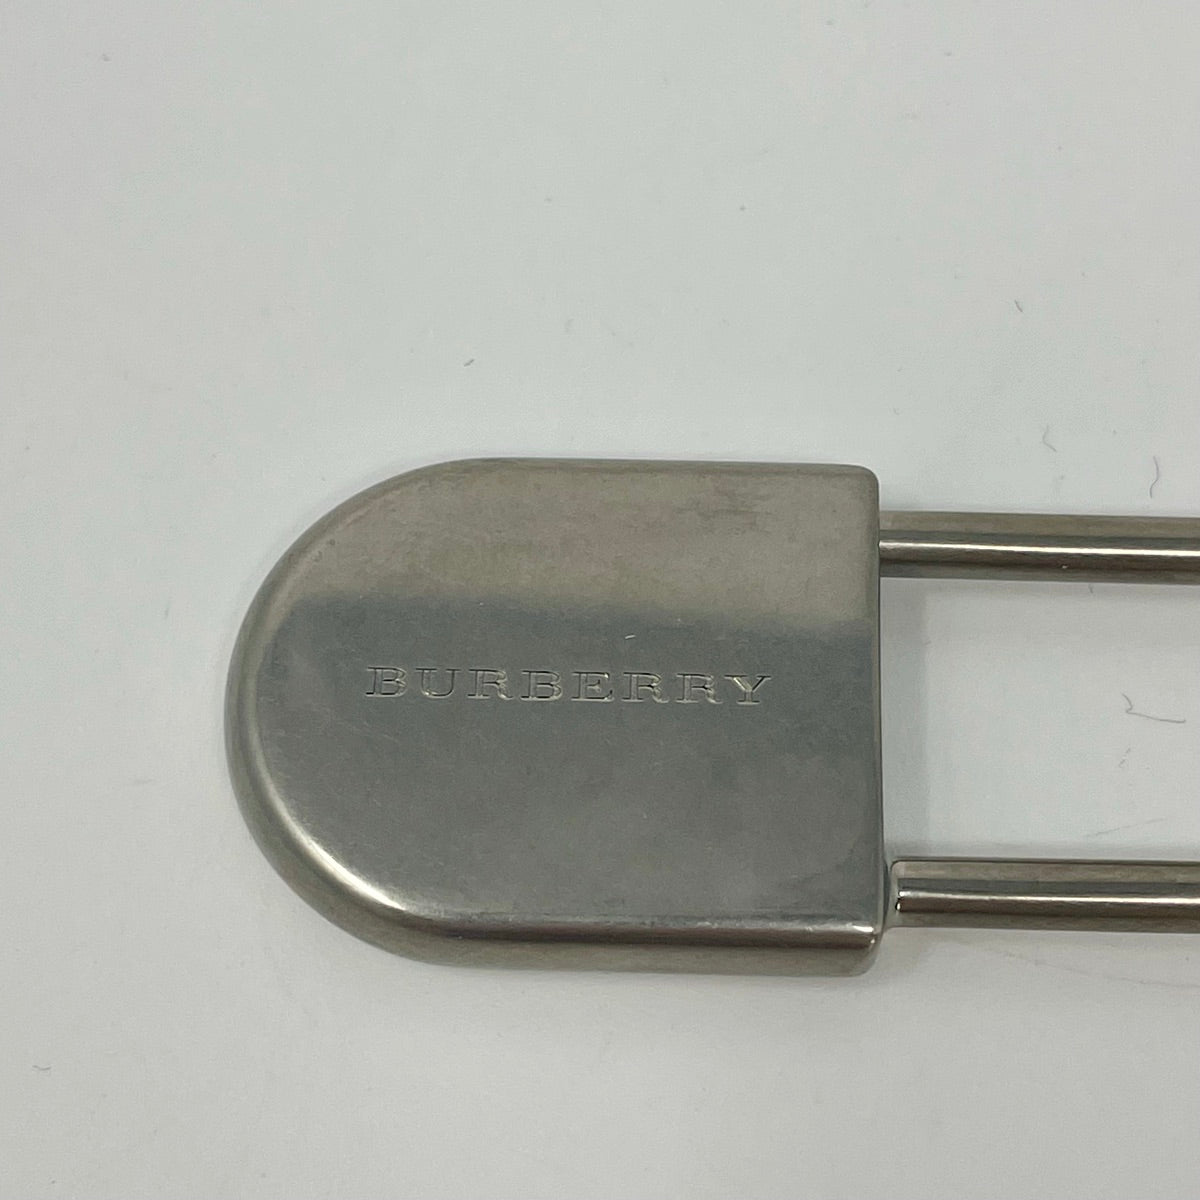 Burberry Safety Pin Keyring